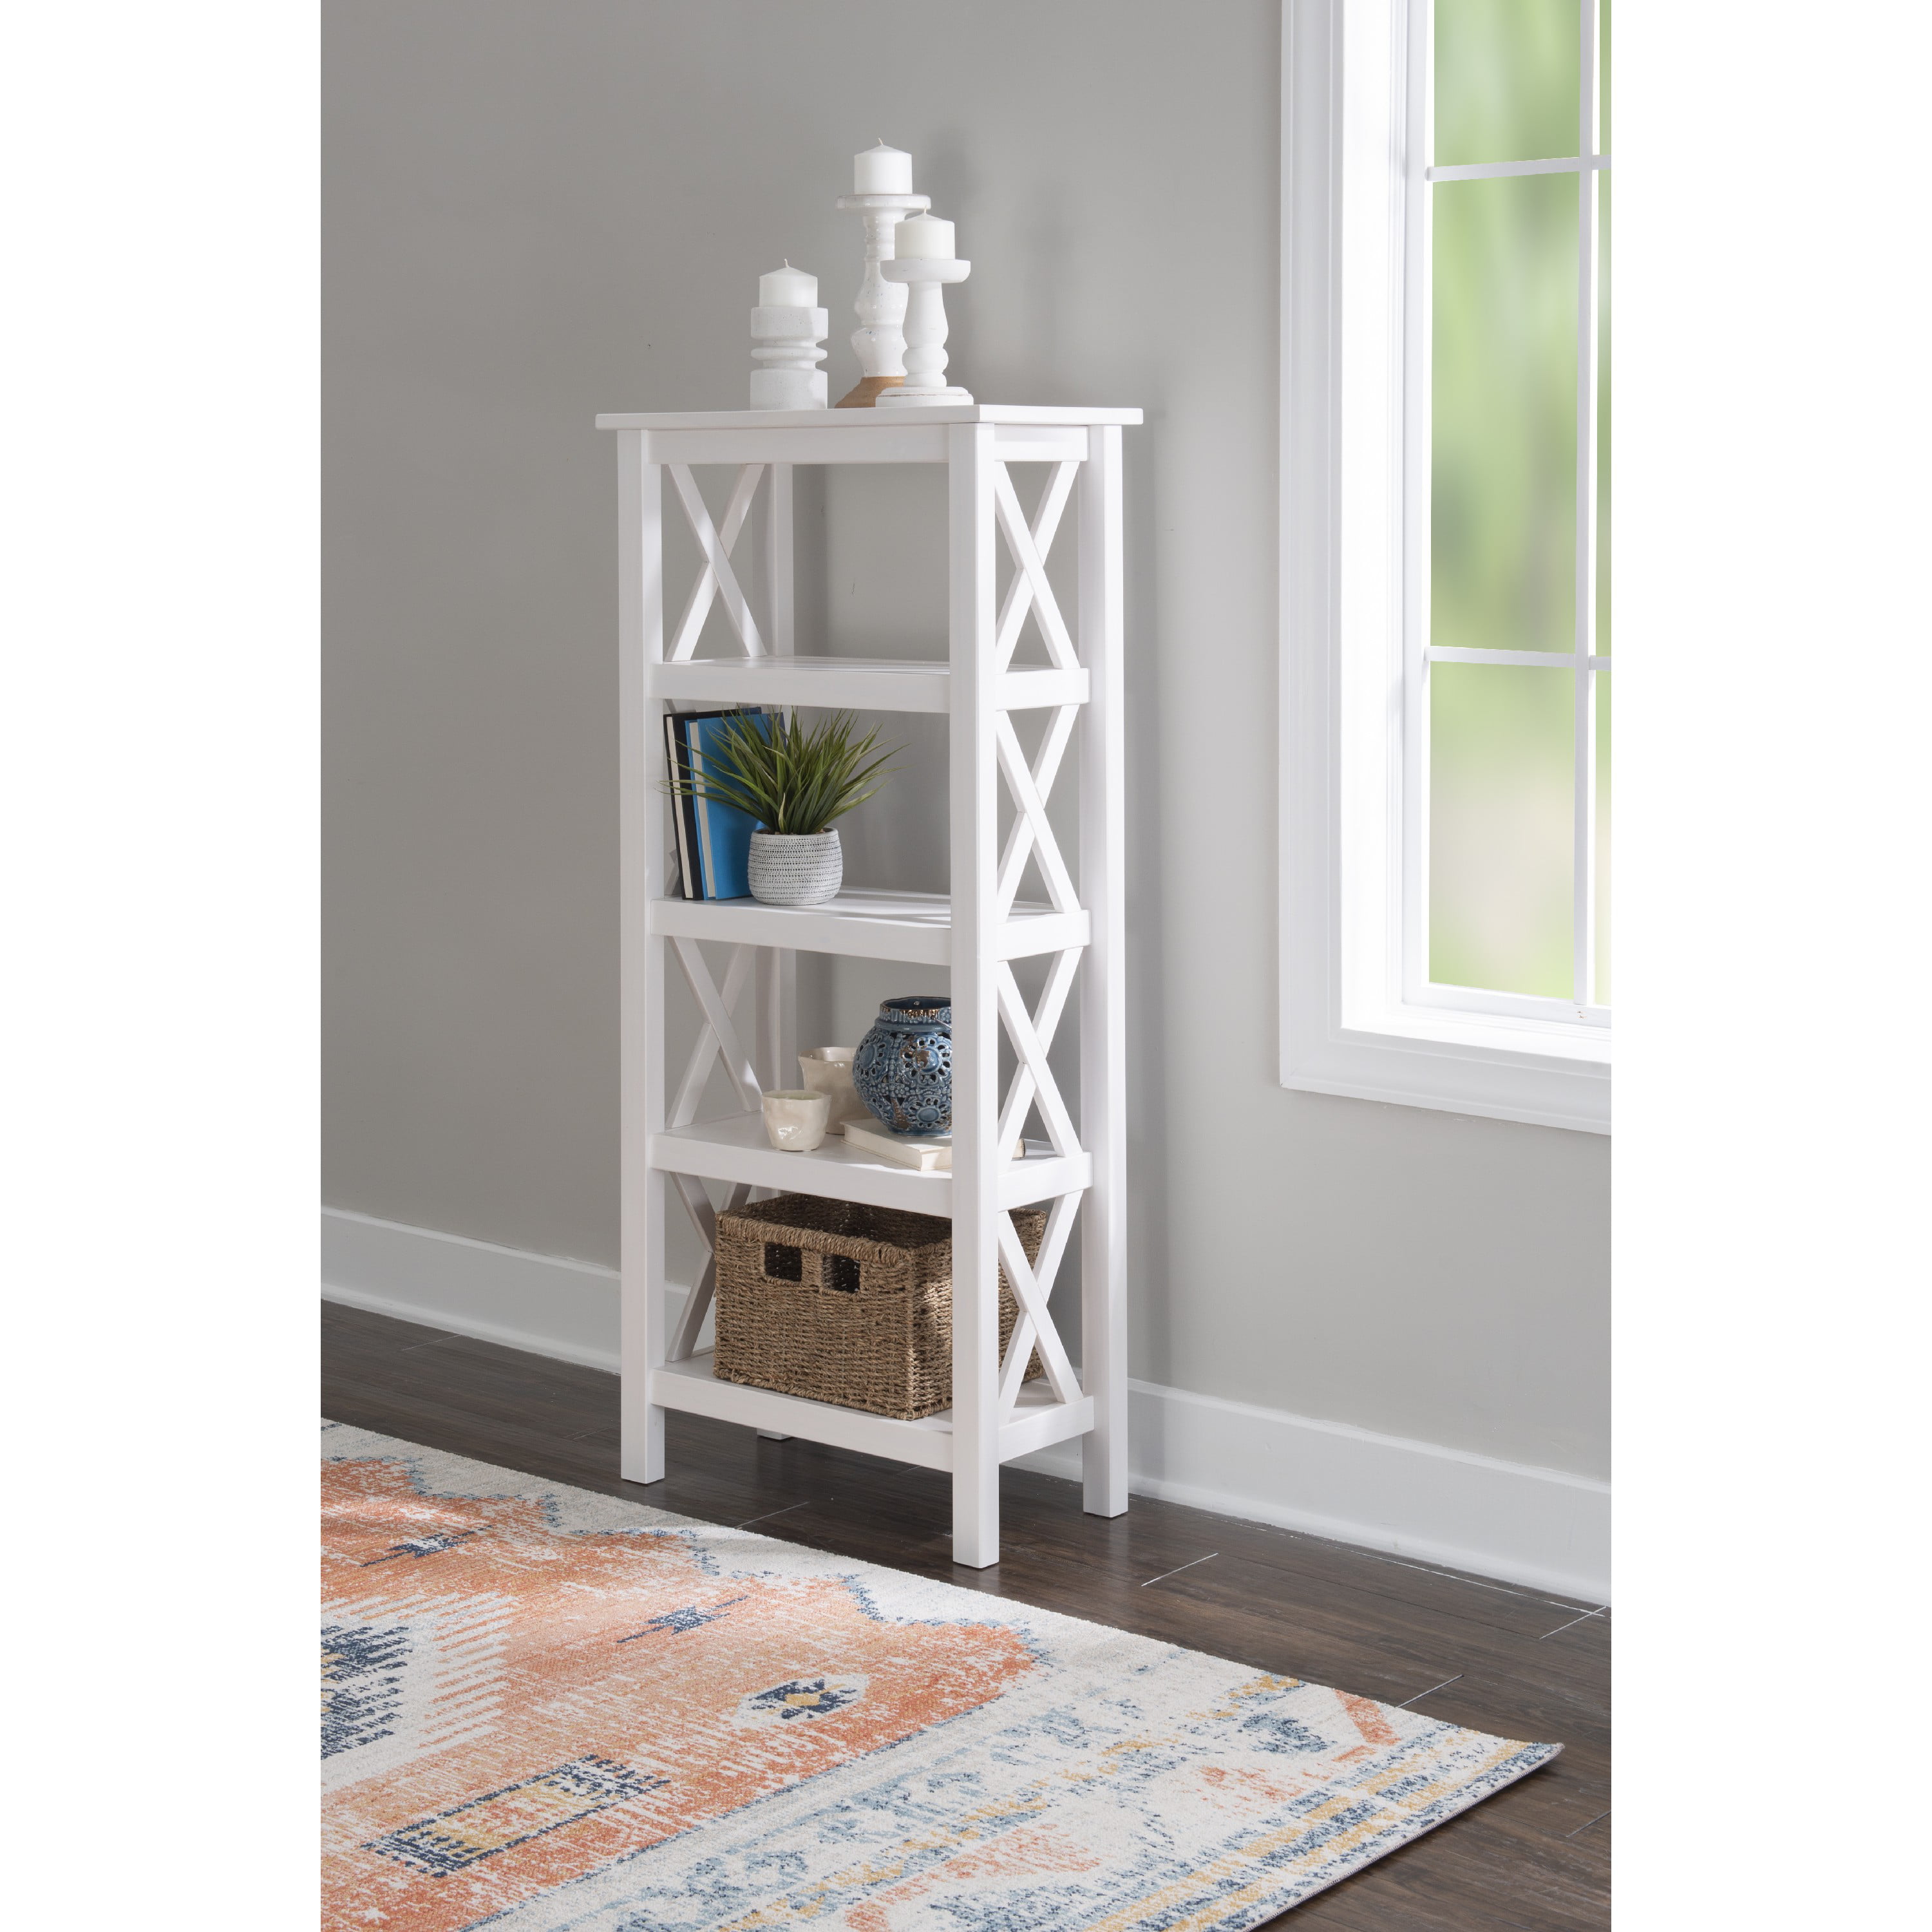 Details about   New Shelves Corner Display Rack 5 Tier Shelf Stand Furniture Storage Home Office 